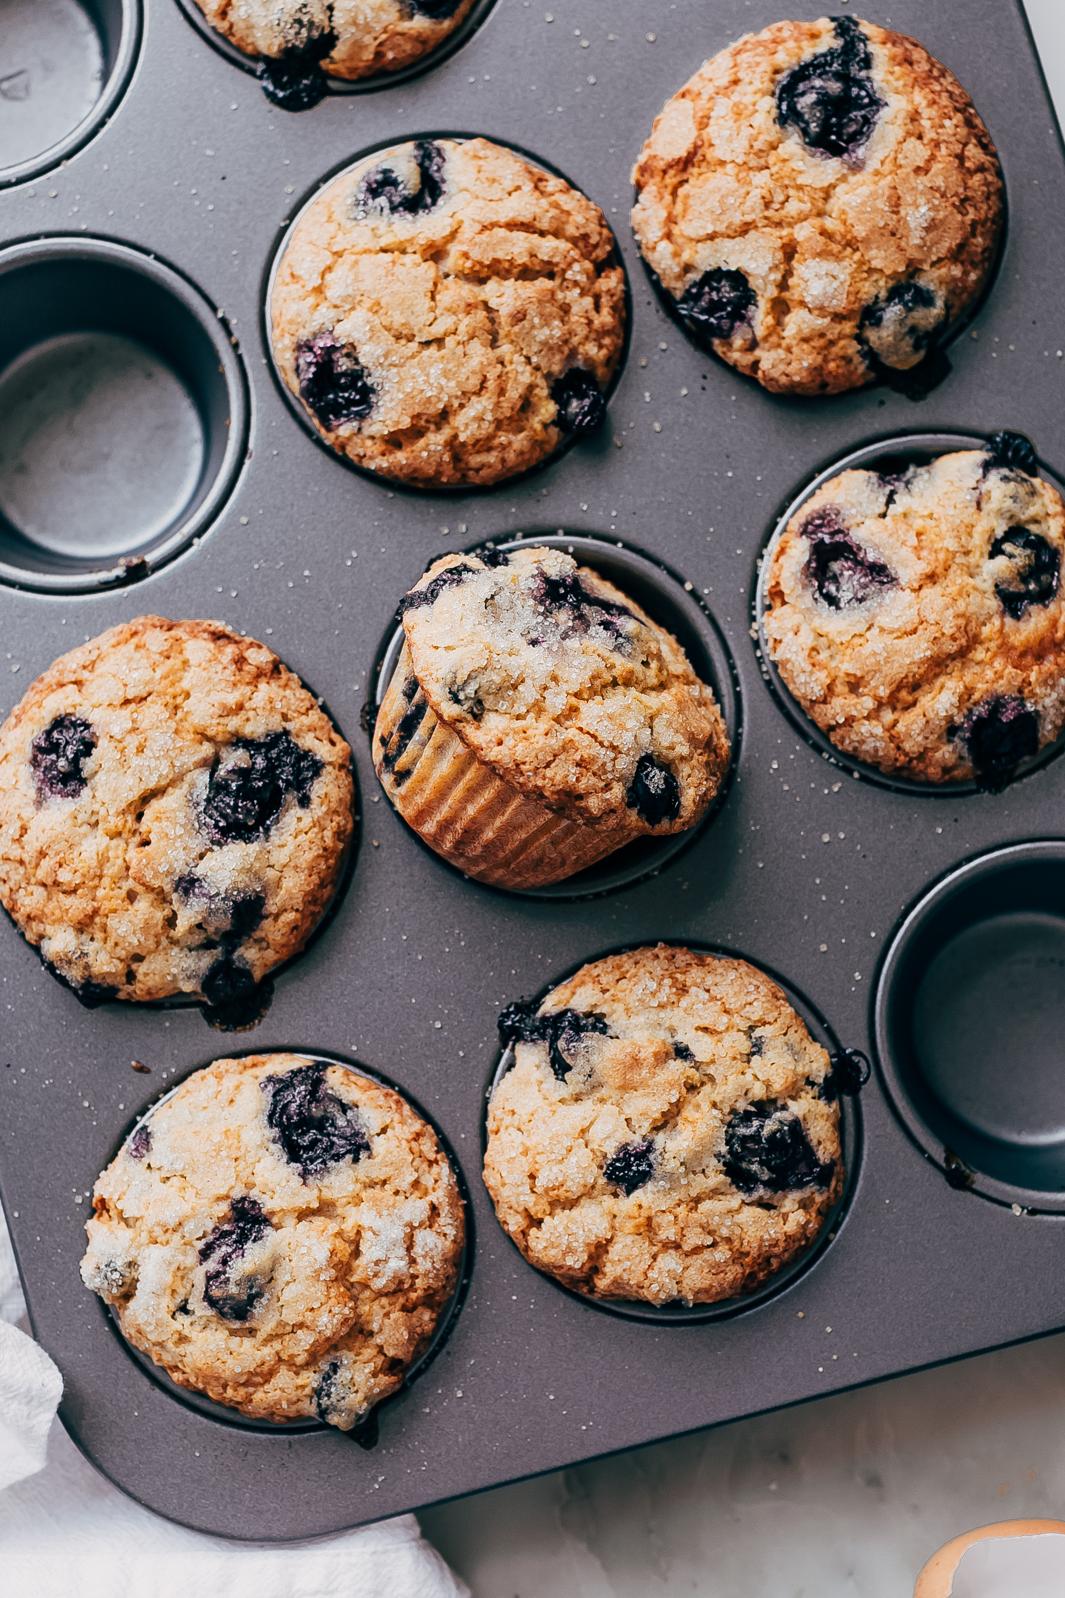  You won't believe these muffins are gluten-free until you try them.